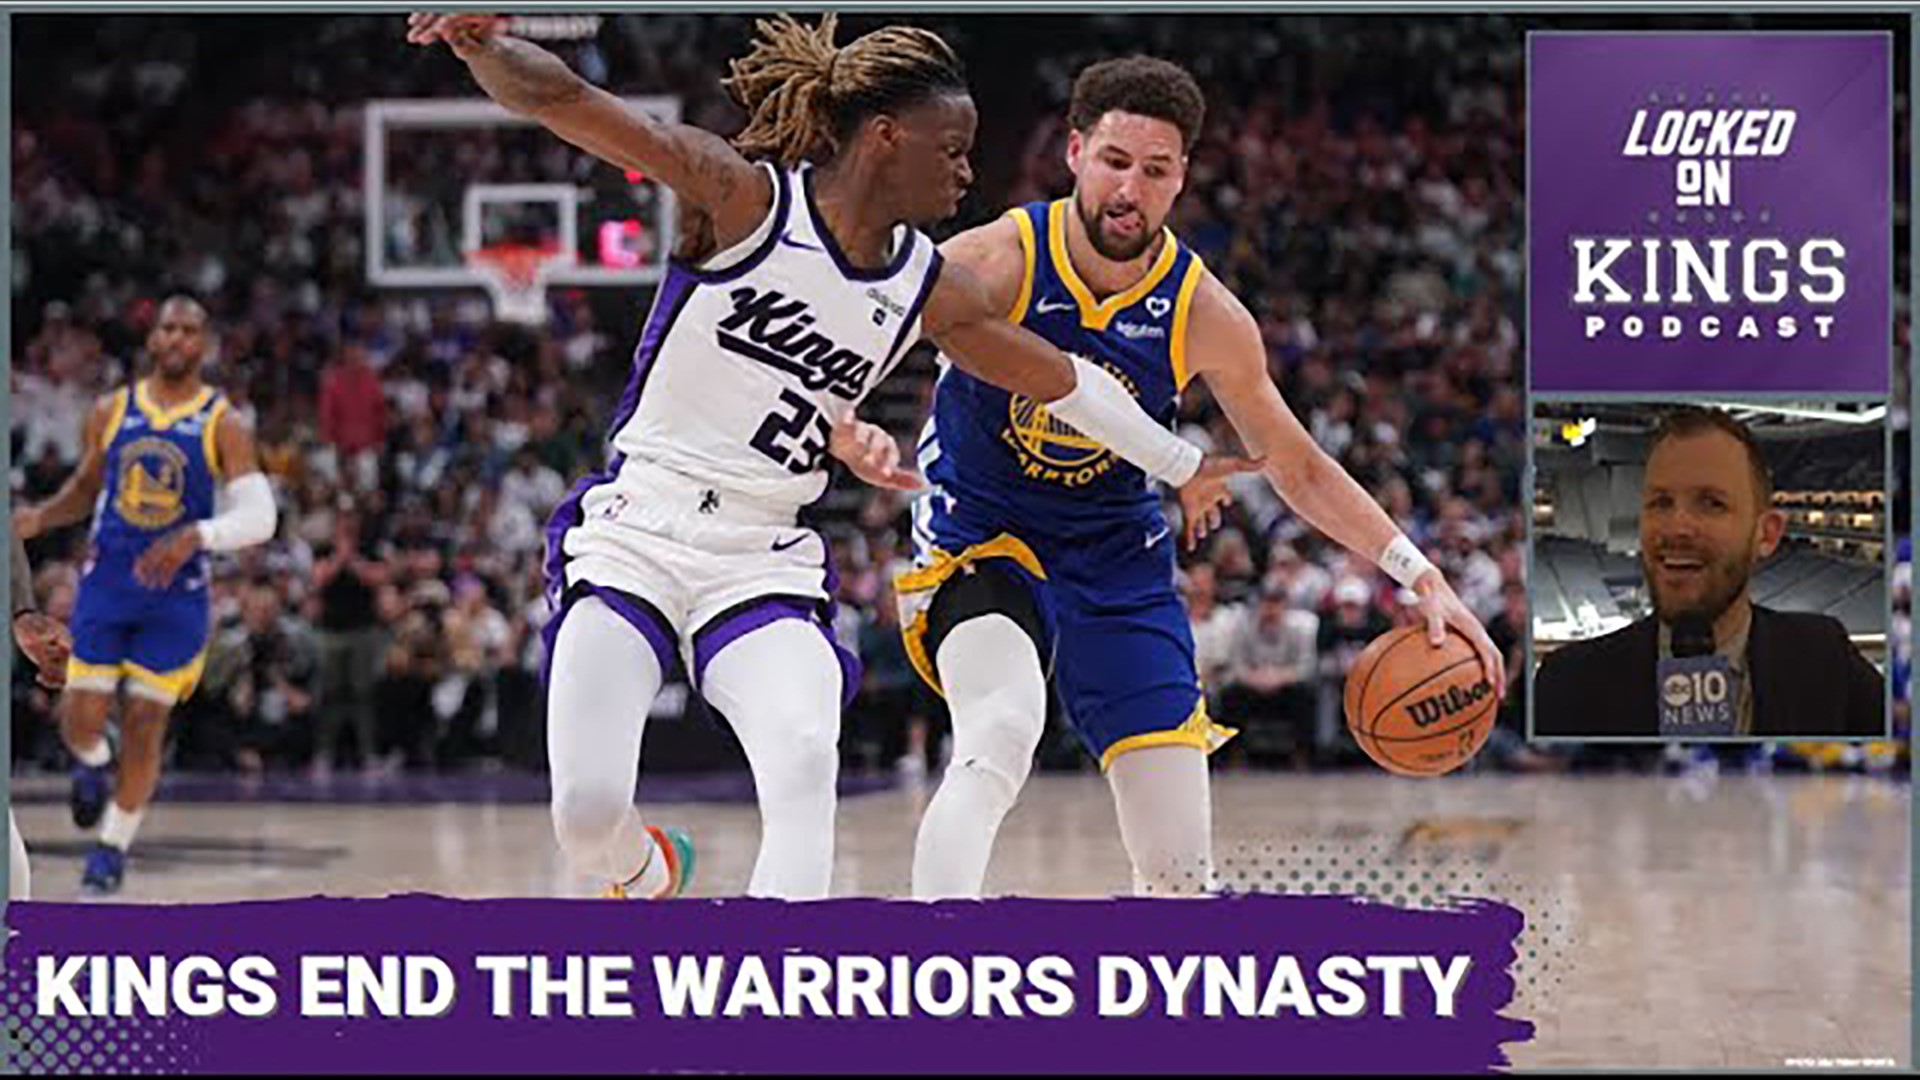 Matt George reacts to the Sacramento Kings' dominant 118-94 win in the NBA Play-In Tournament, ending the Golden State Warriors season.